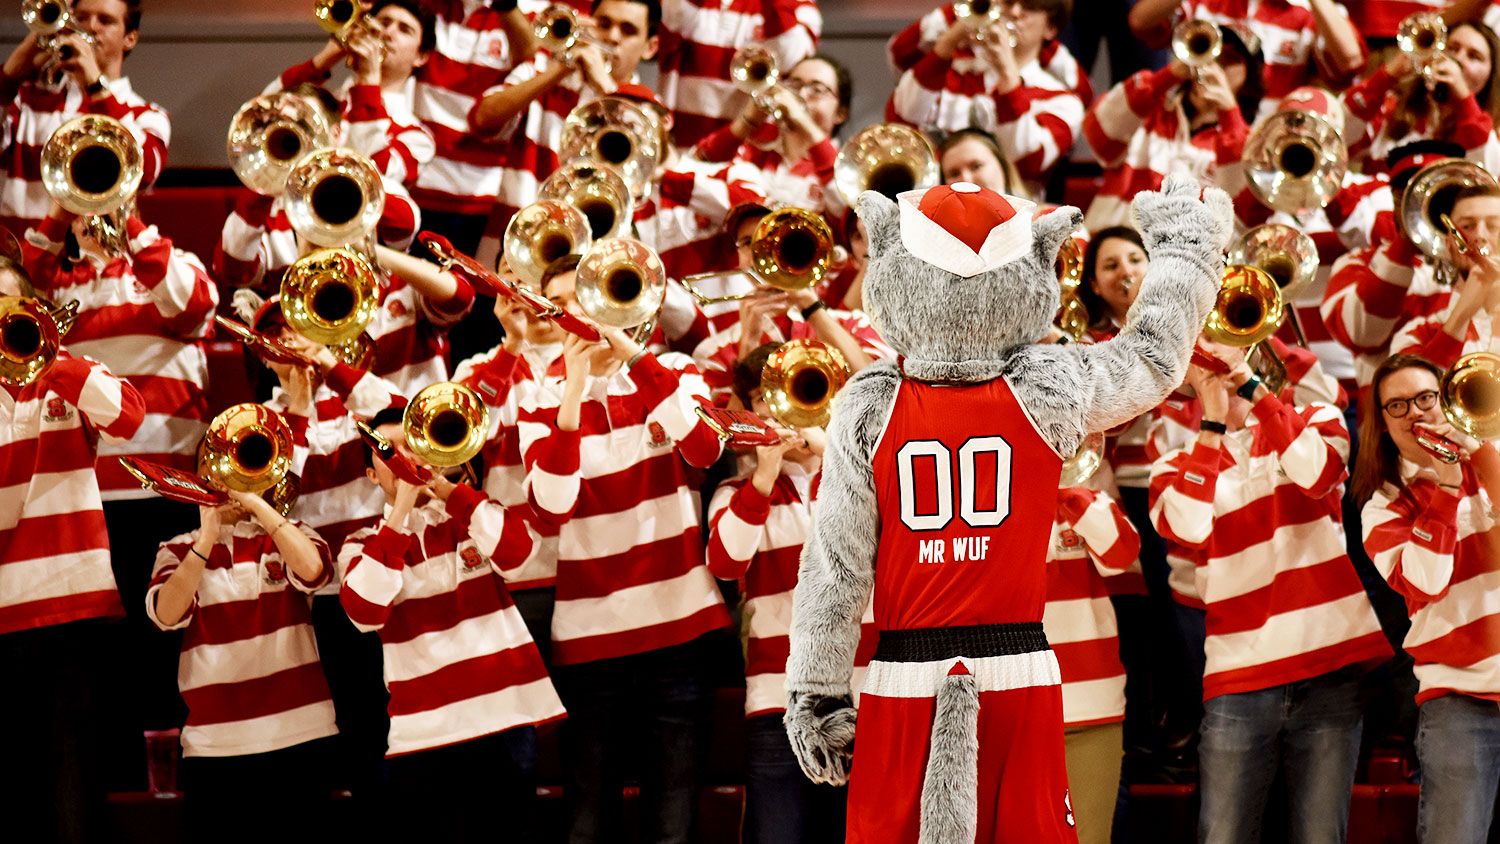 Mr Wuf conducts the pep band during a time-out at the women's basketball game in Reynolds Coliseum.